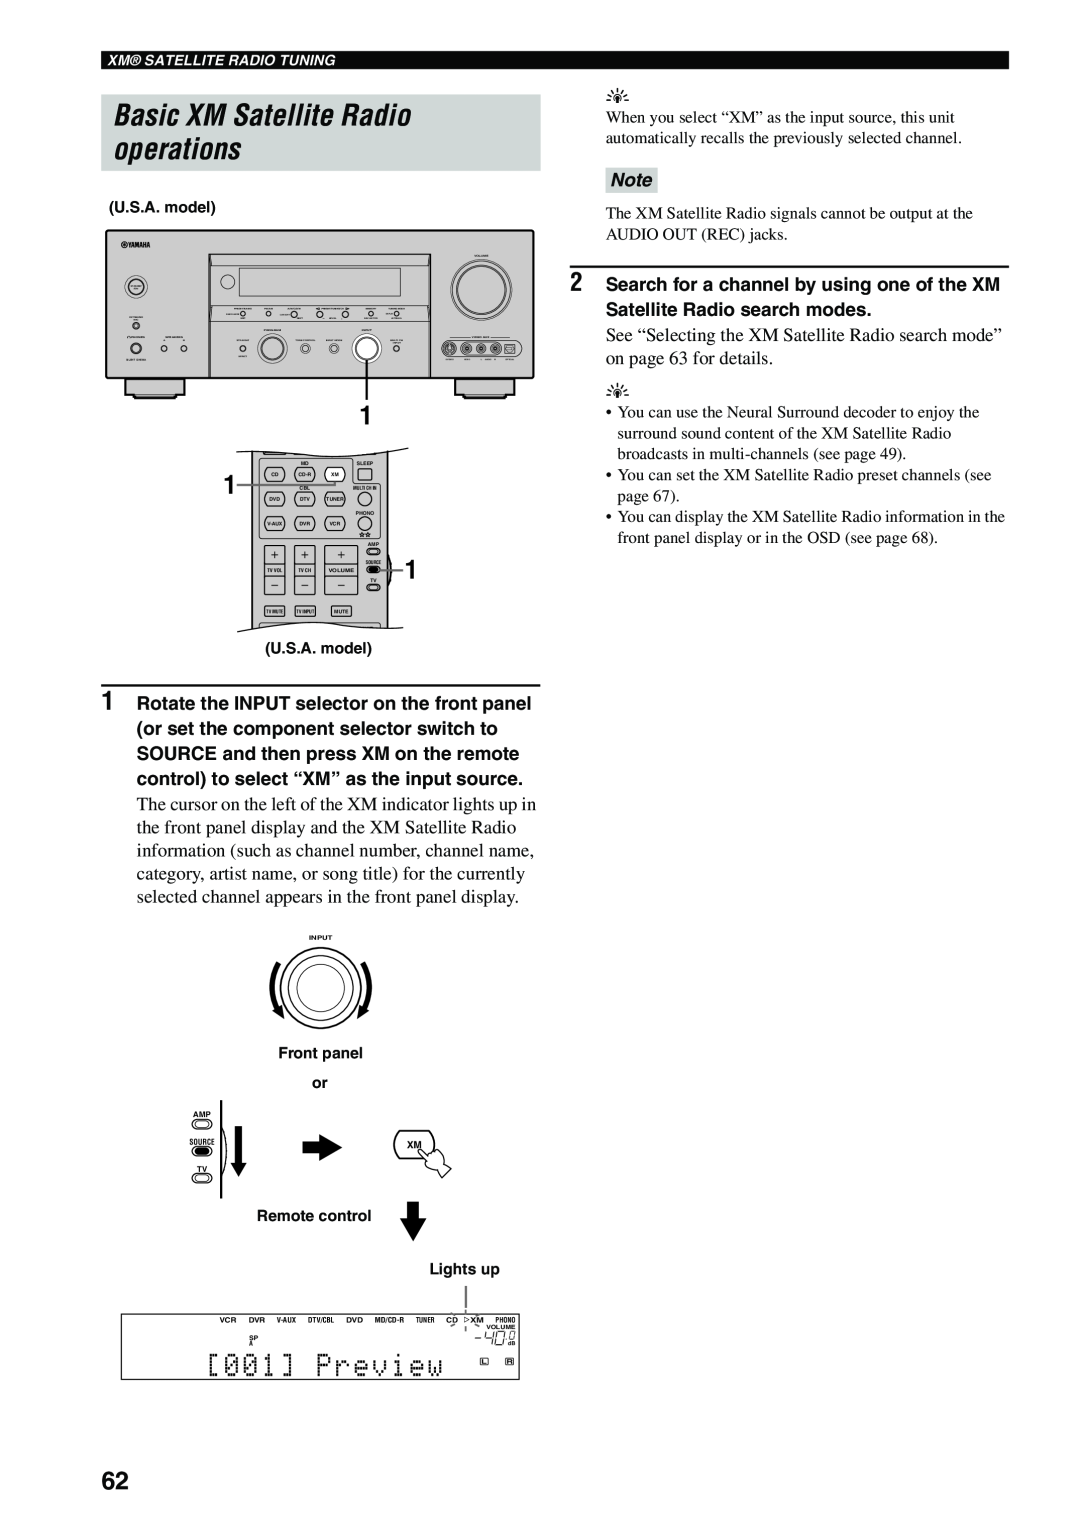 Yamaha HTR-5960 owner manual Basic XM Satellite Radio operations, Preview L R 